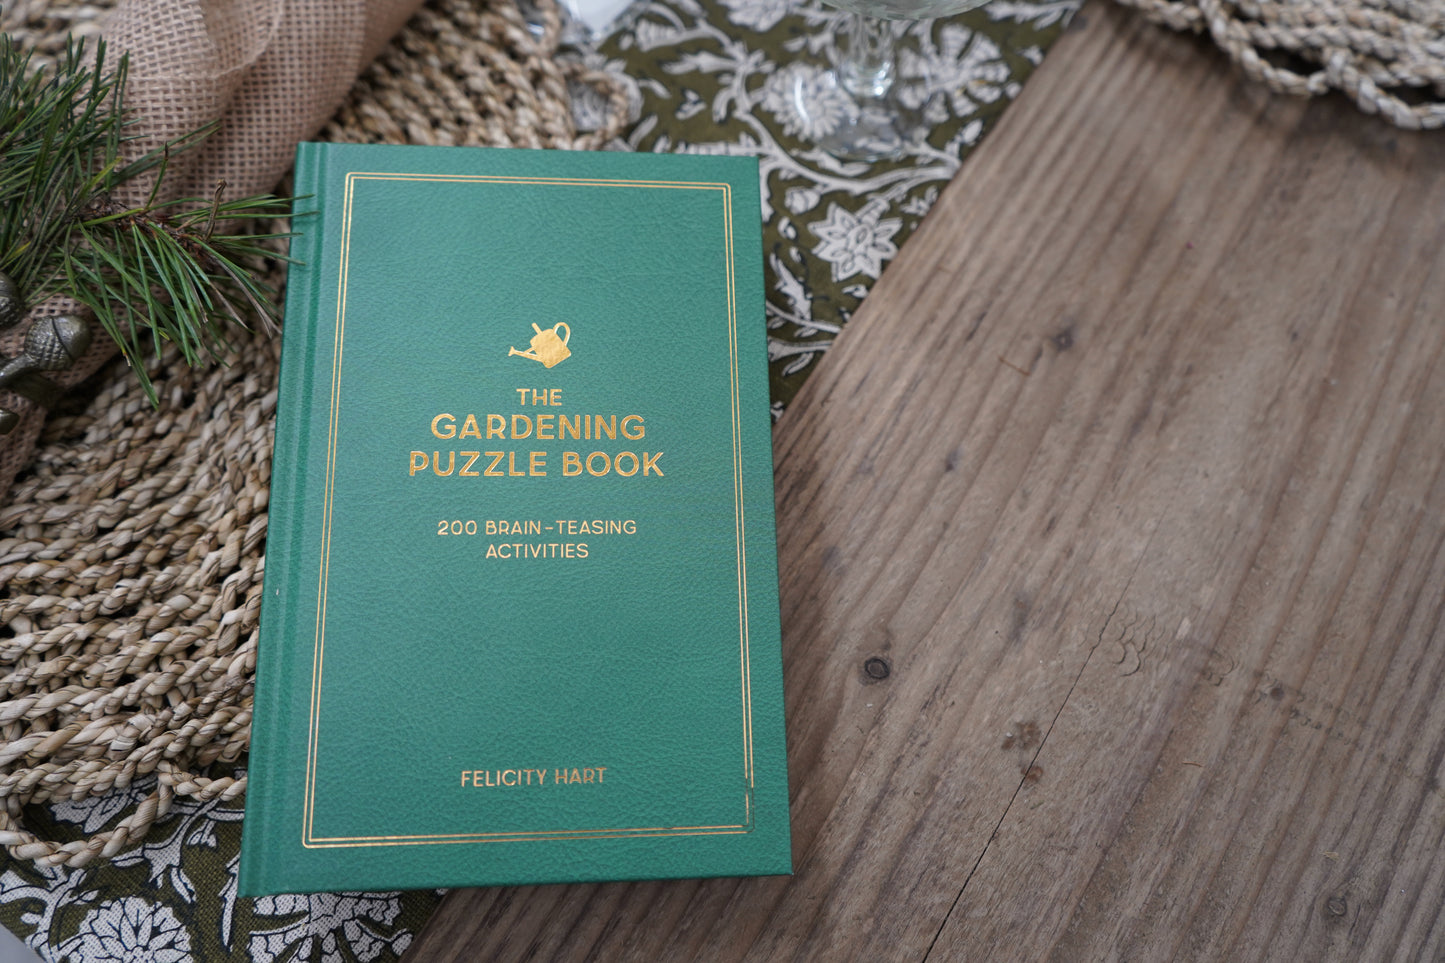 The Gardening Puzzle Book